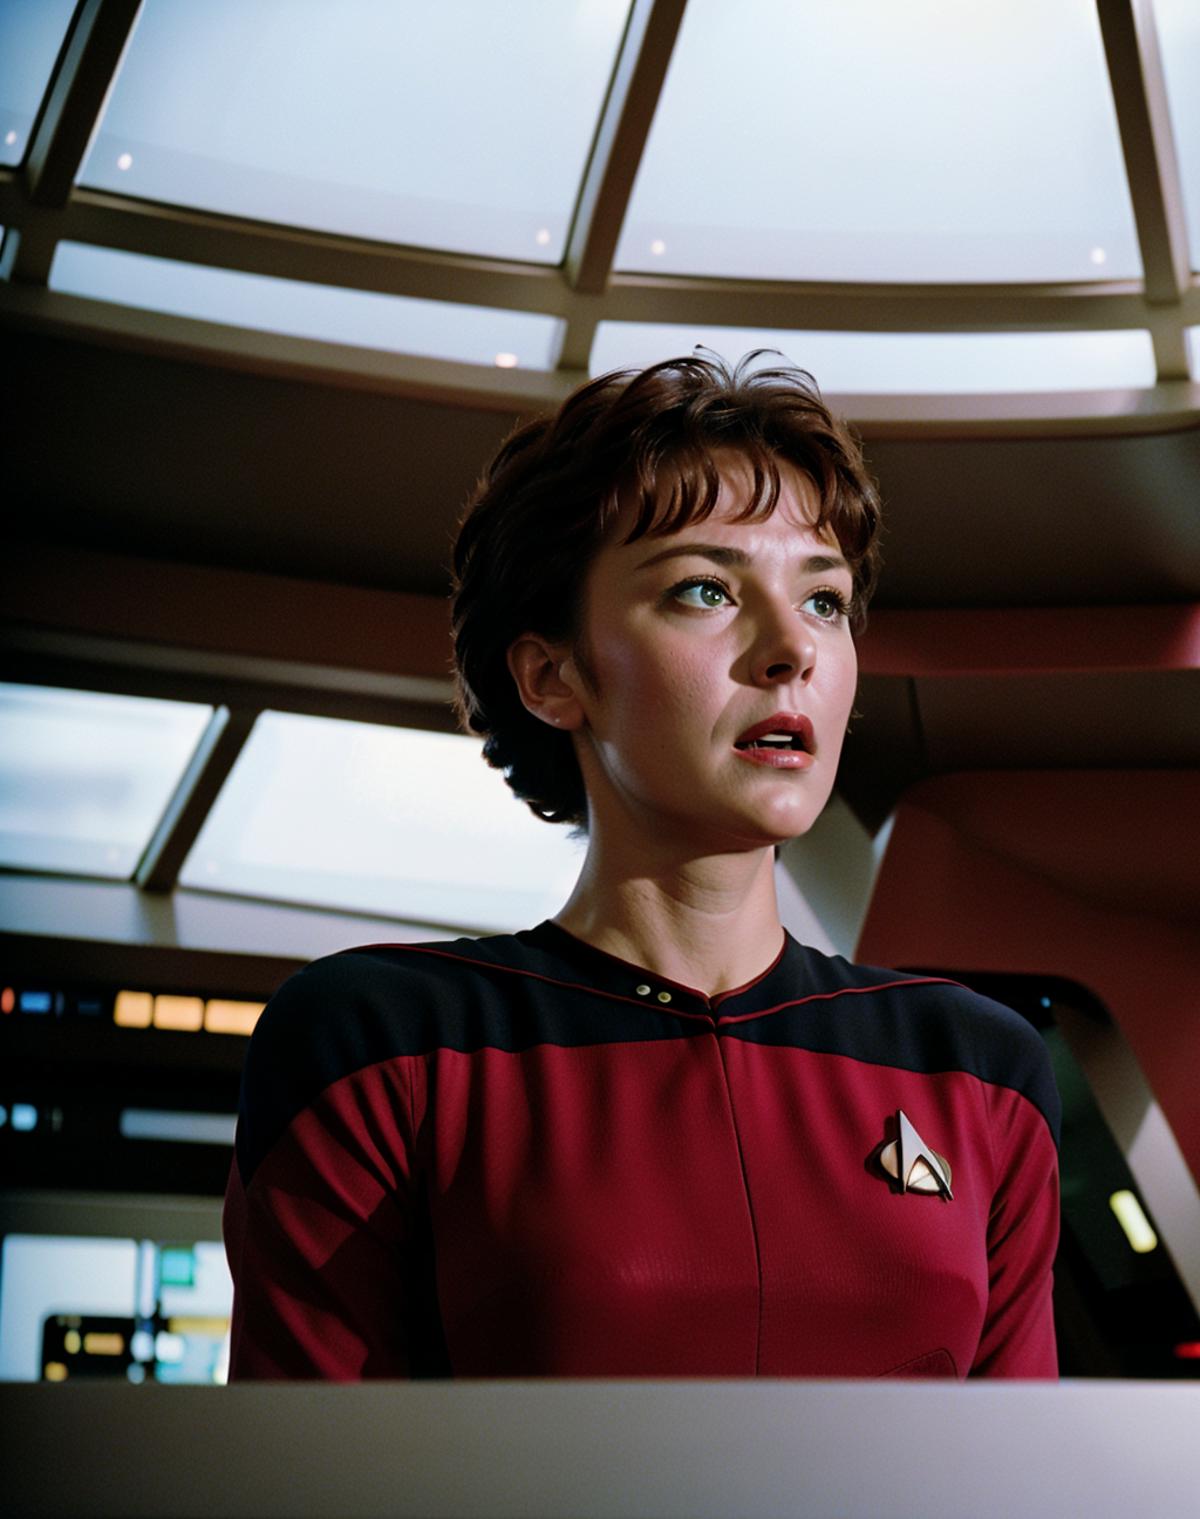 Star Trek TNG uniforms(captains variant update) image by impossiblebearcl4060